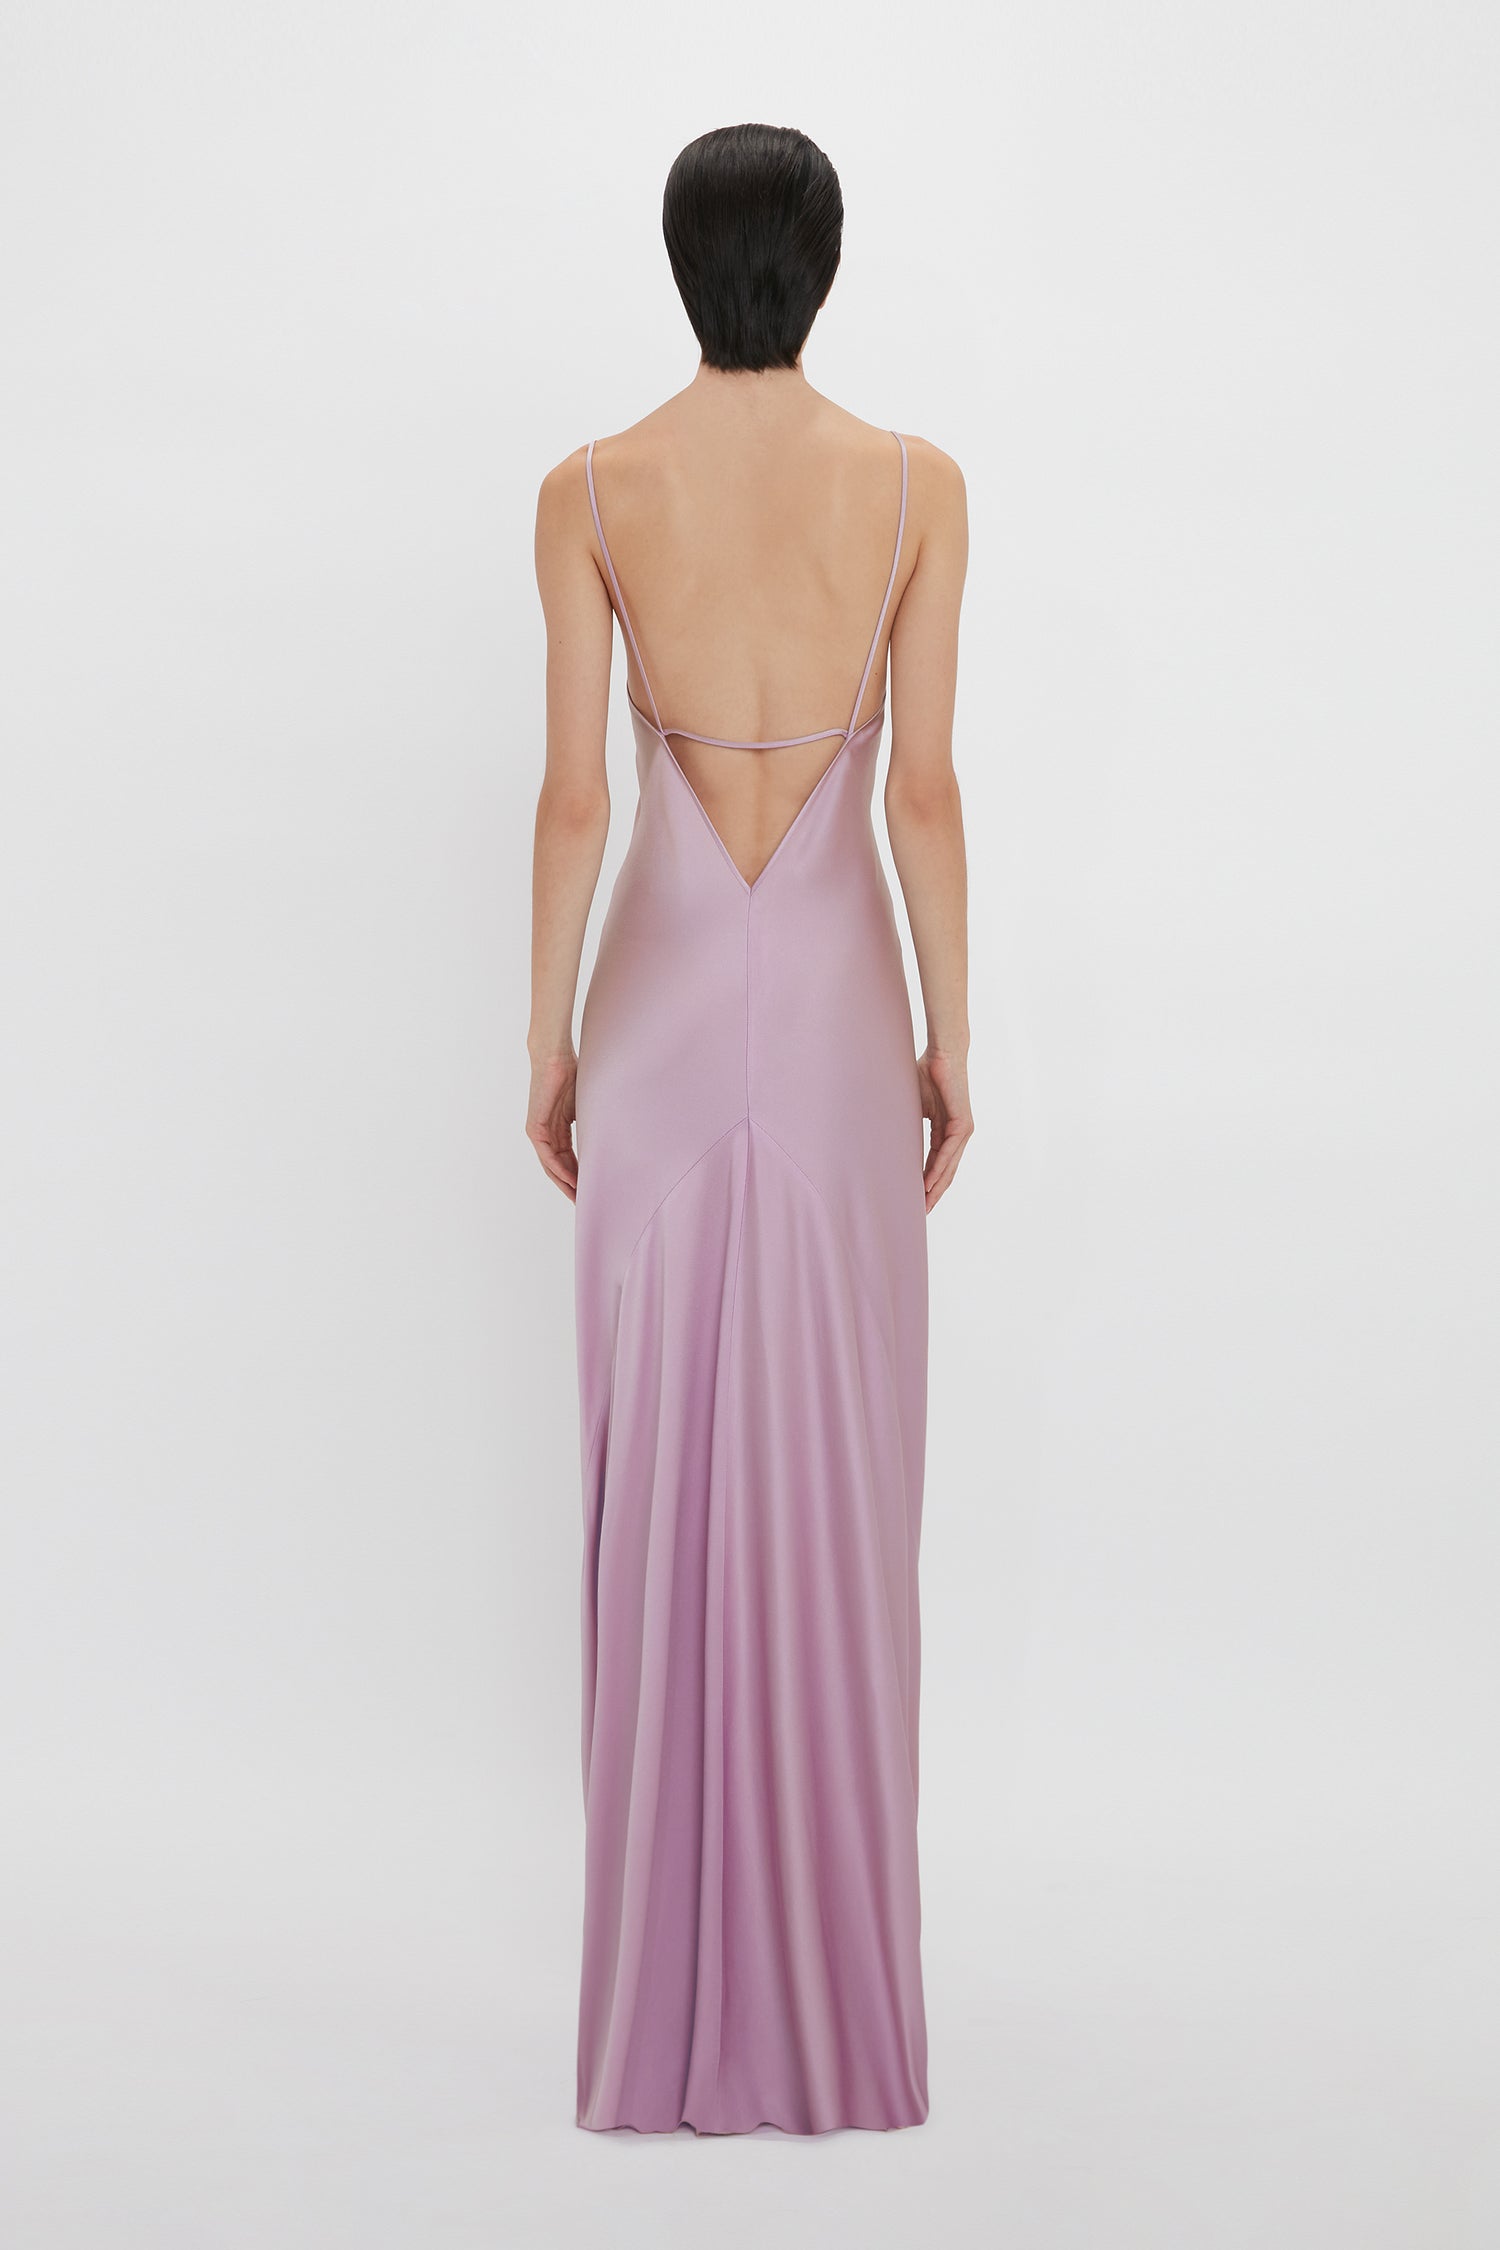 A woman with short, dark hair is wearing a backless, floor-length lilac satin slip dress with thin straps, reminiscent of Victoria Beckham's elegant designs. She is shown from the back in the Low Back Cami Floor-Length Dress In Rosa by Victoria Beckham.